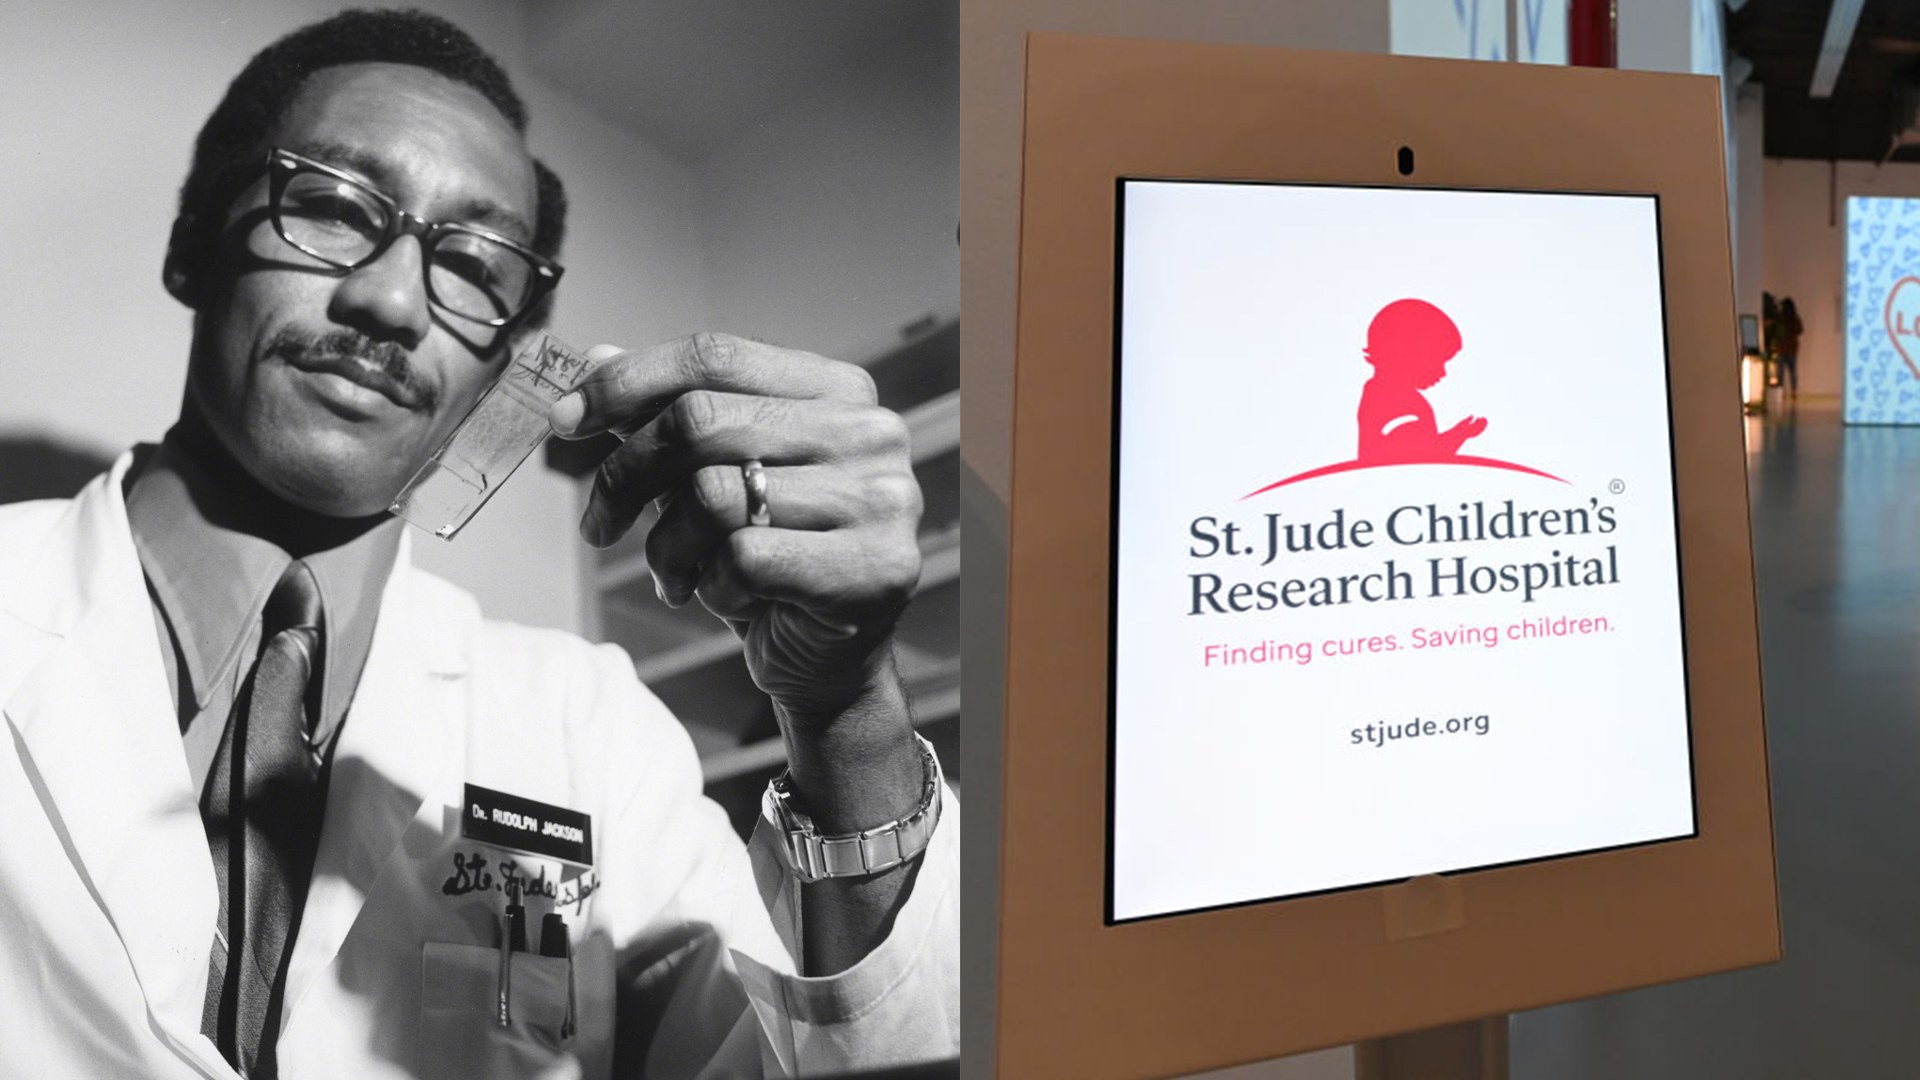 A Section At St. Jude Children’s Research Hospital Renamed After The First Black Research Physician To Work There